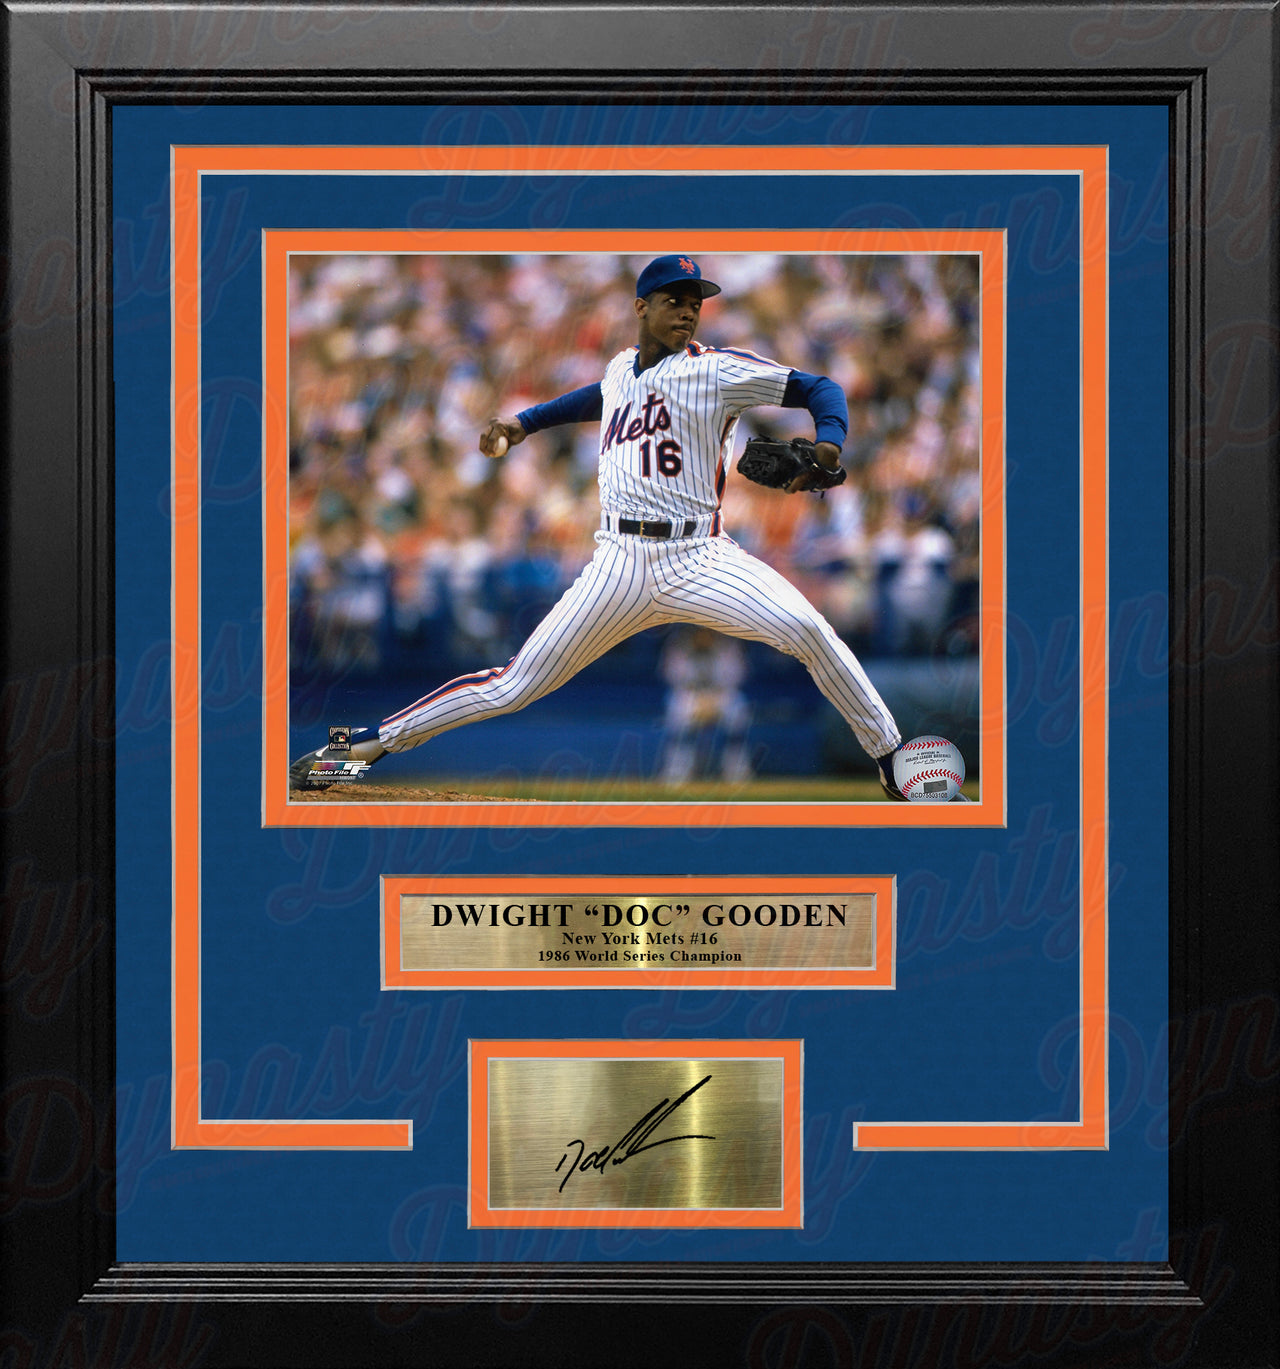 Dwight Gooden in Action New York Mets 8" x 10" Framed Baseball Photo with Engraved Autograph - Dynasty Sports & Framing 